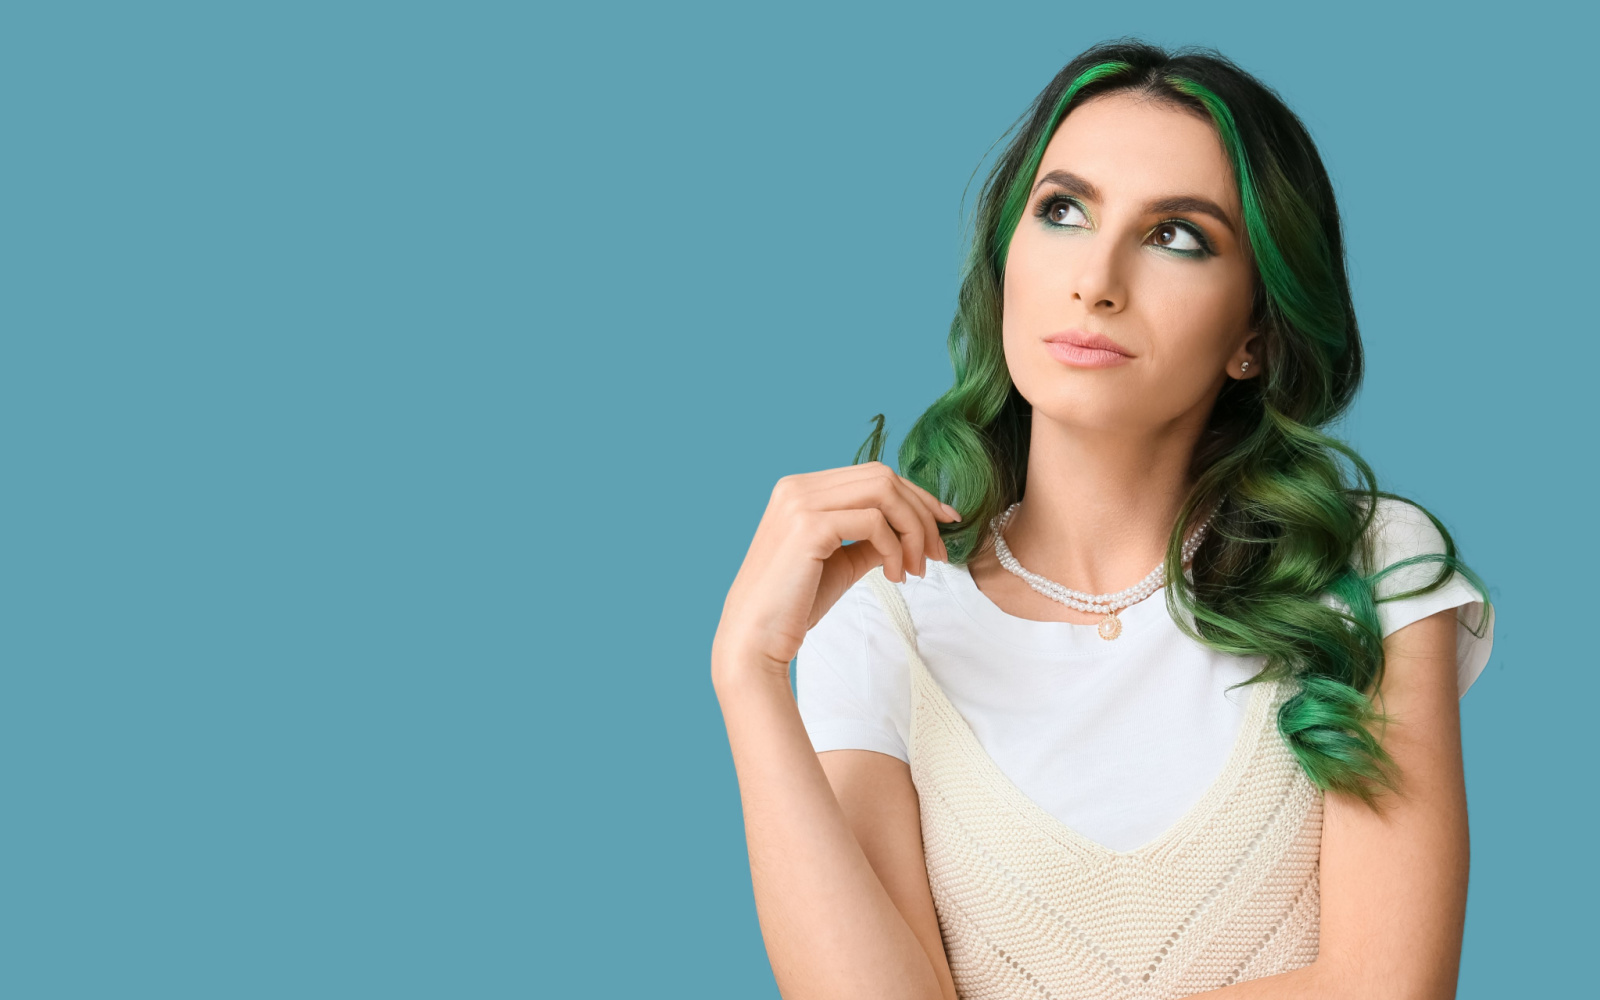 Why Is My Hair Turning Green When I Dye It? | 3 Reasons